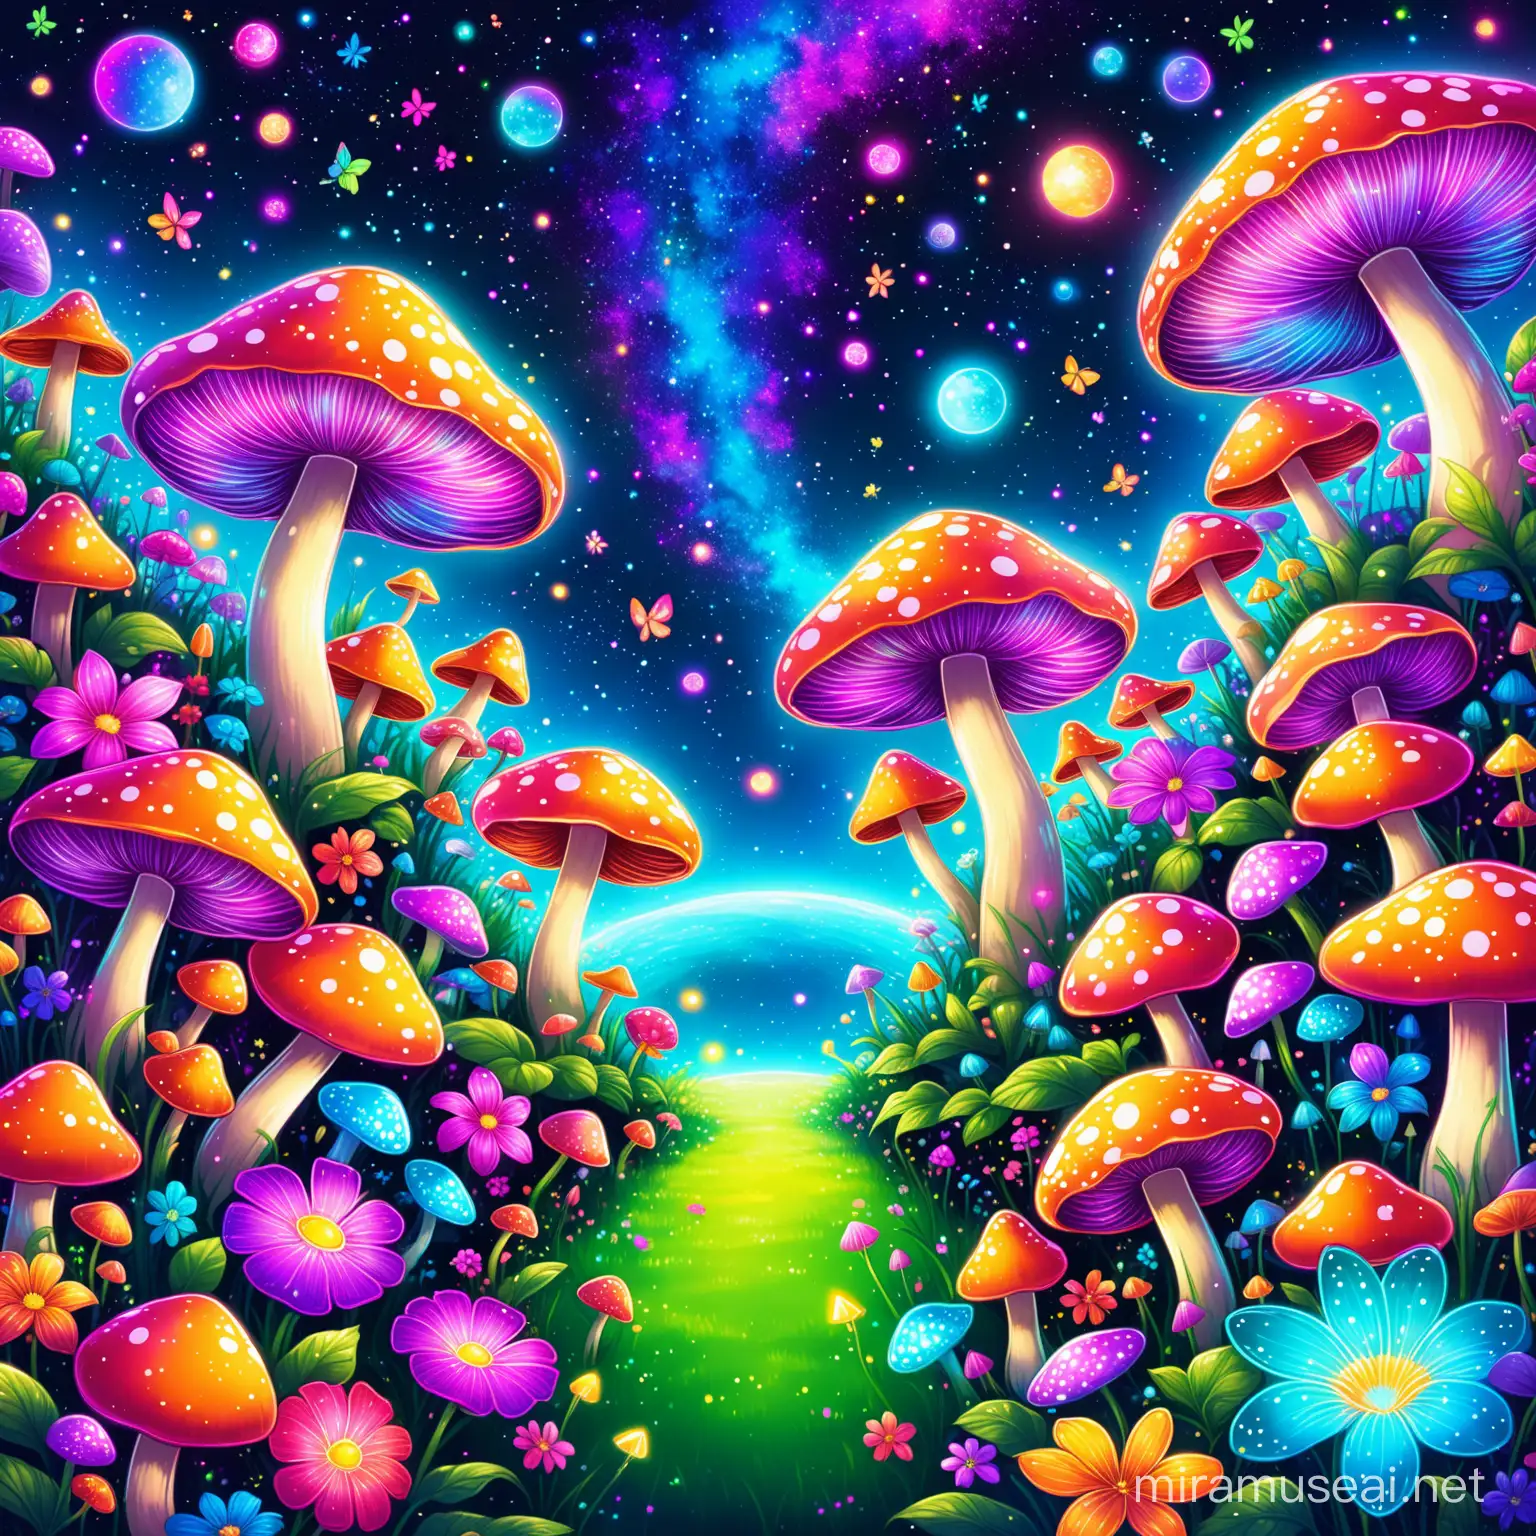 Enchanted Neon Garden Vibrant Floral Wonderland with Cosmic Accents